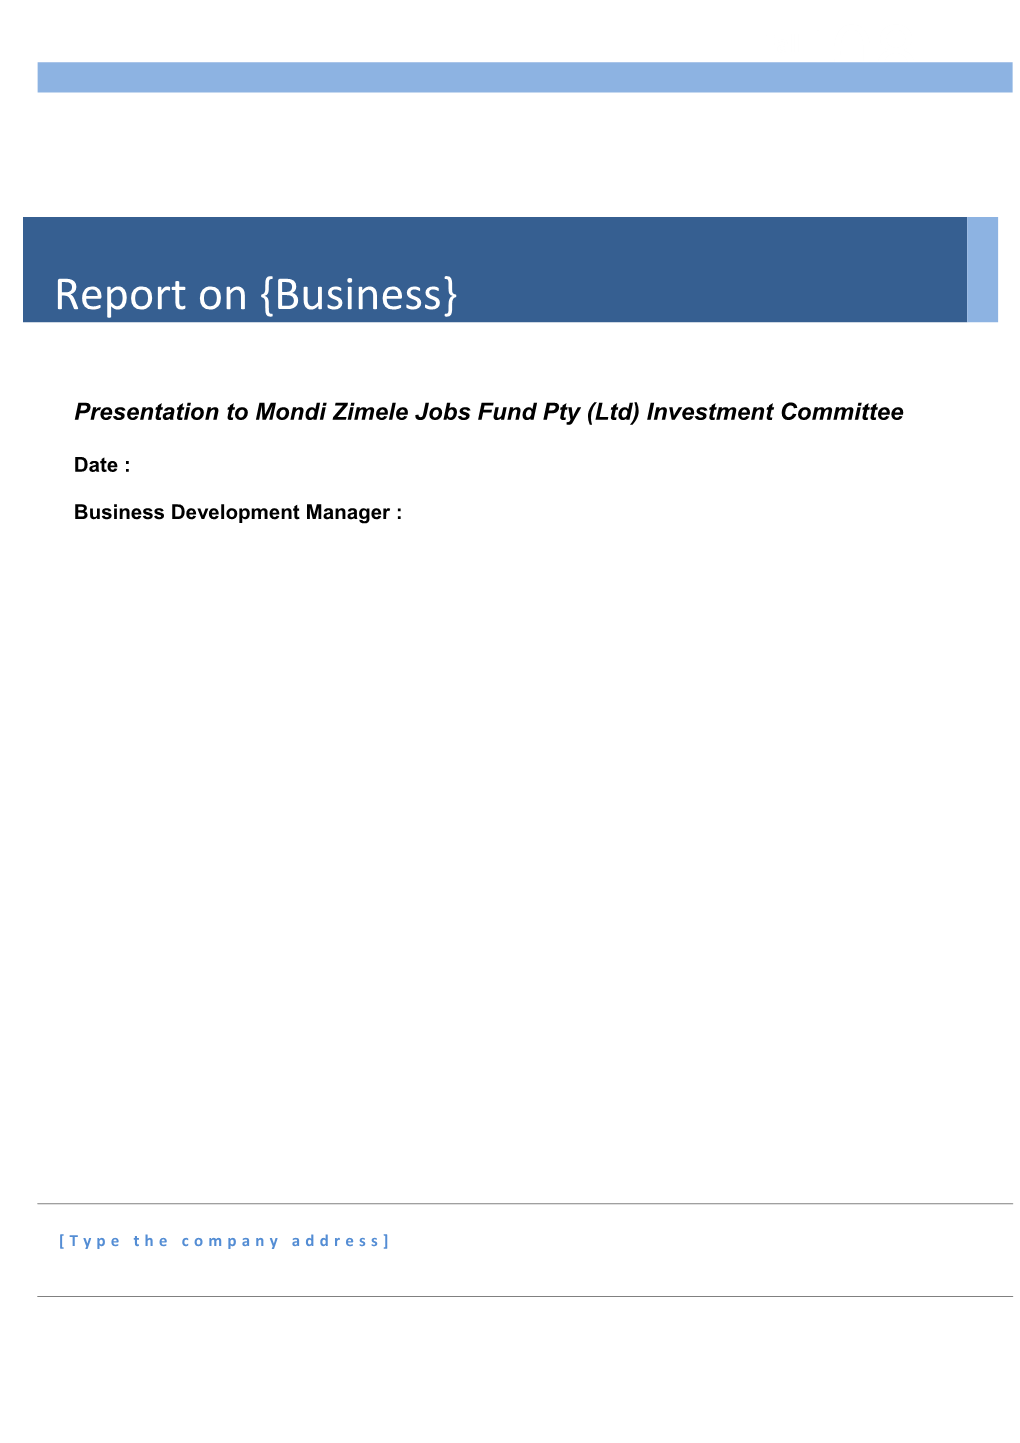 Report on Business